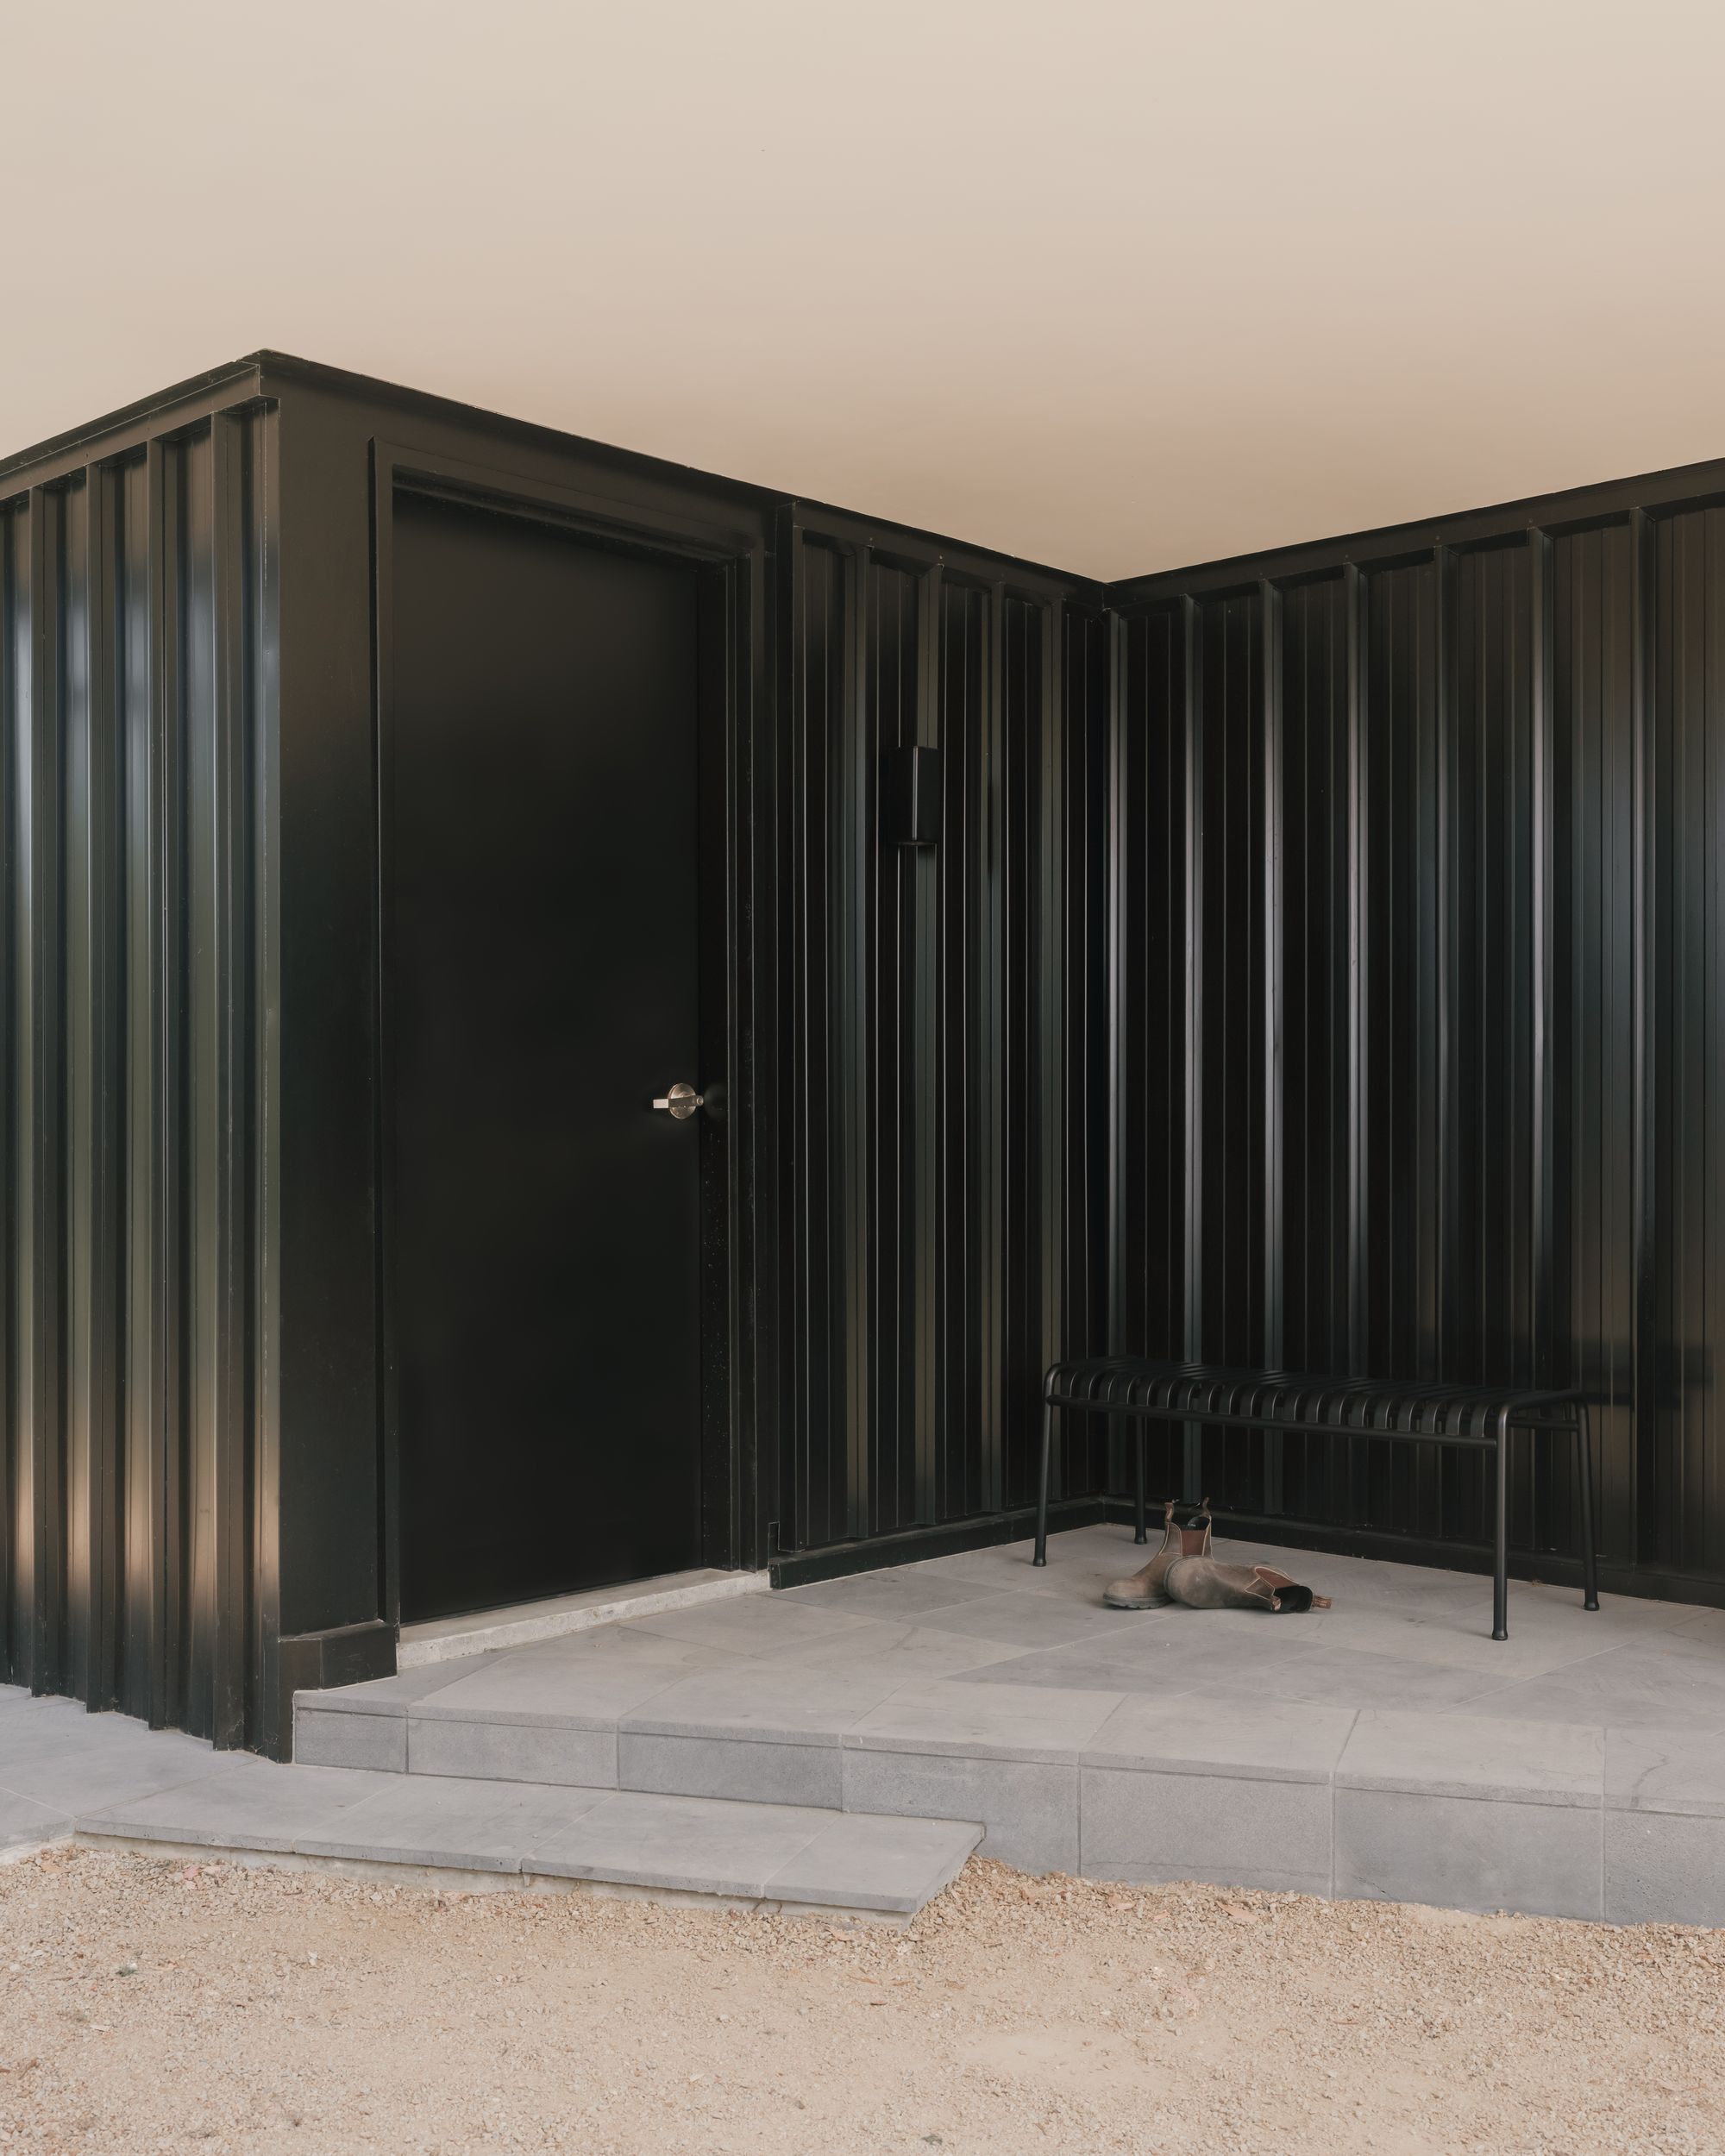 Kennett River House by MGAO showing entry door and bench seat to put shoes on